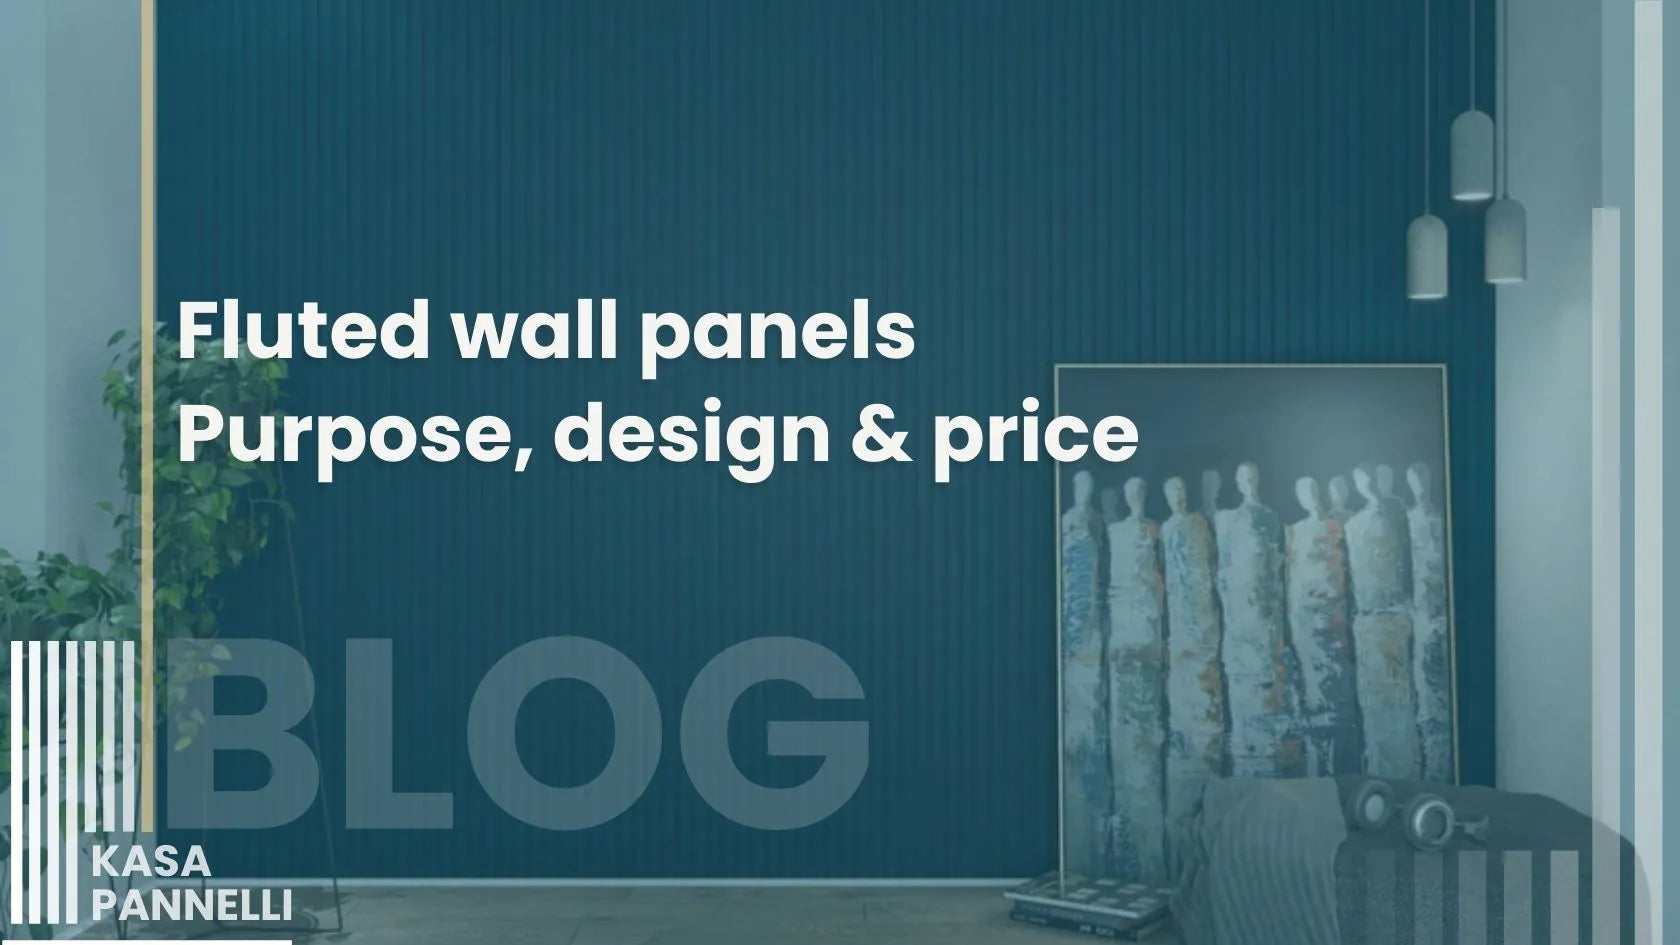 blog picture with text and fluted wall panels in the background